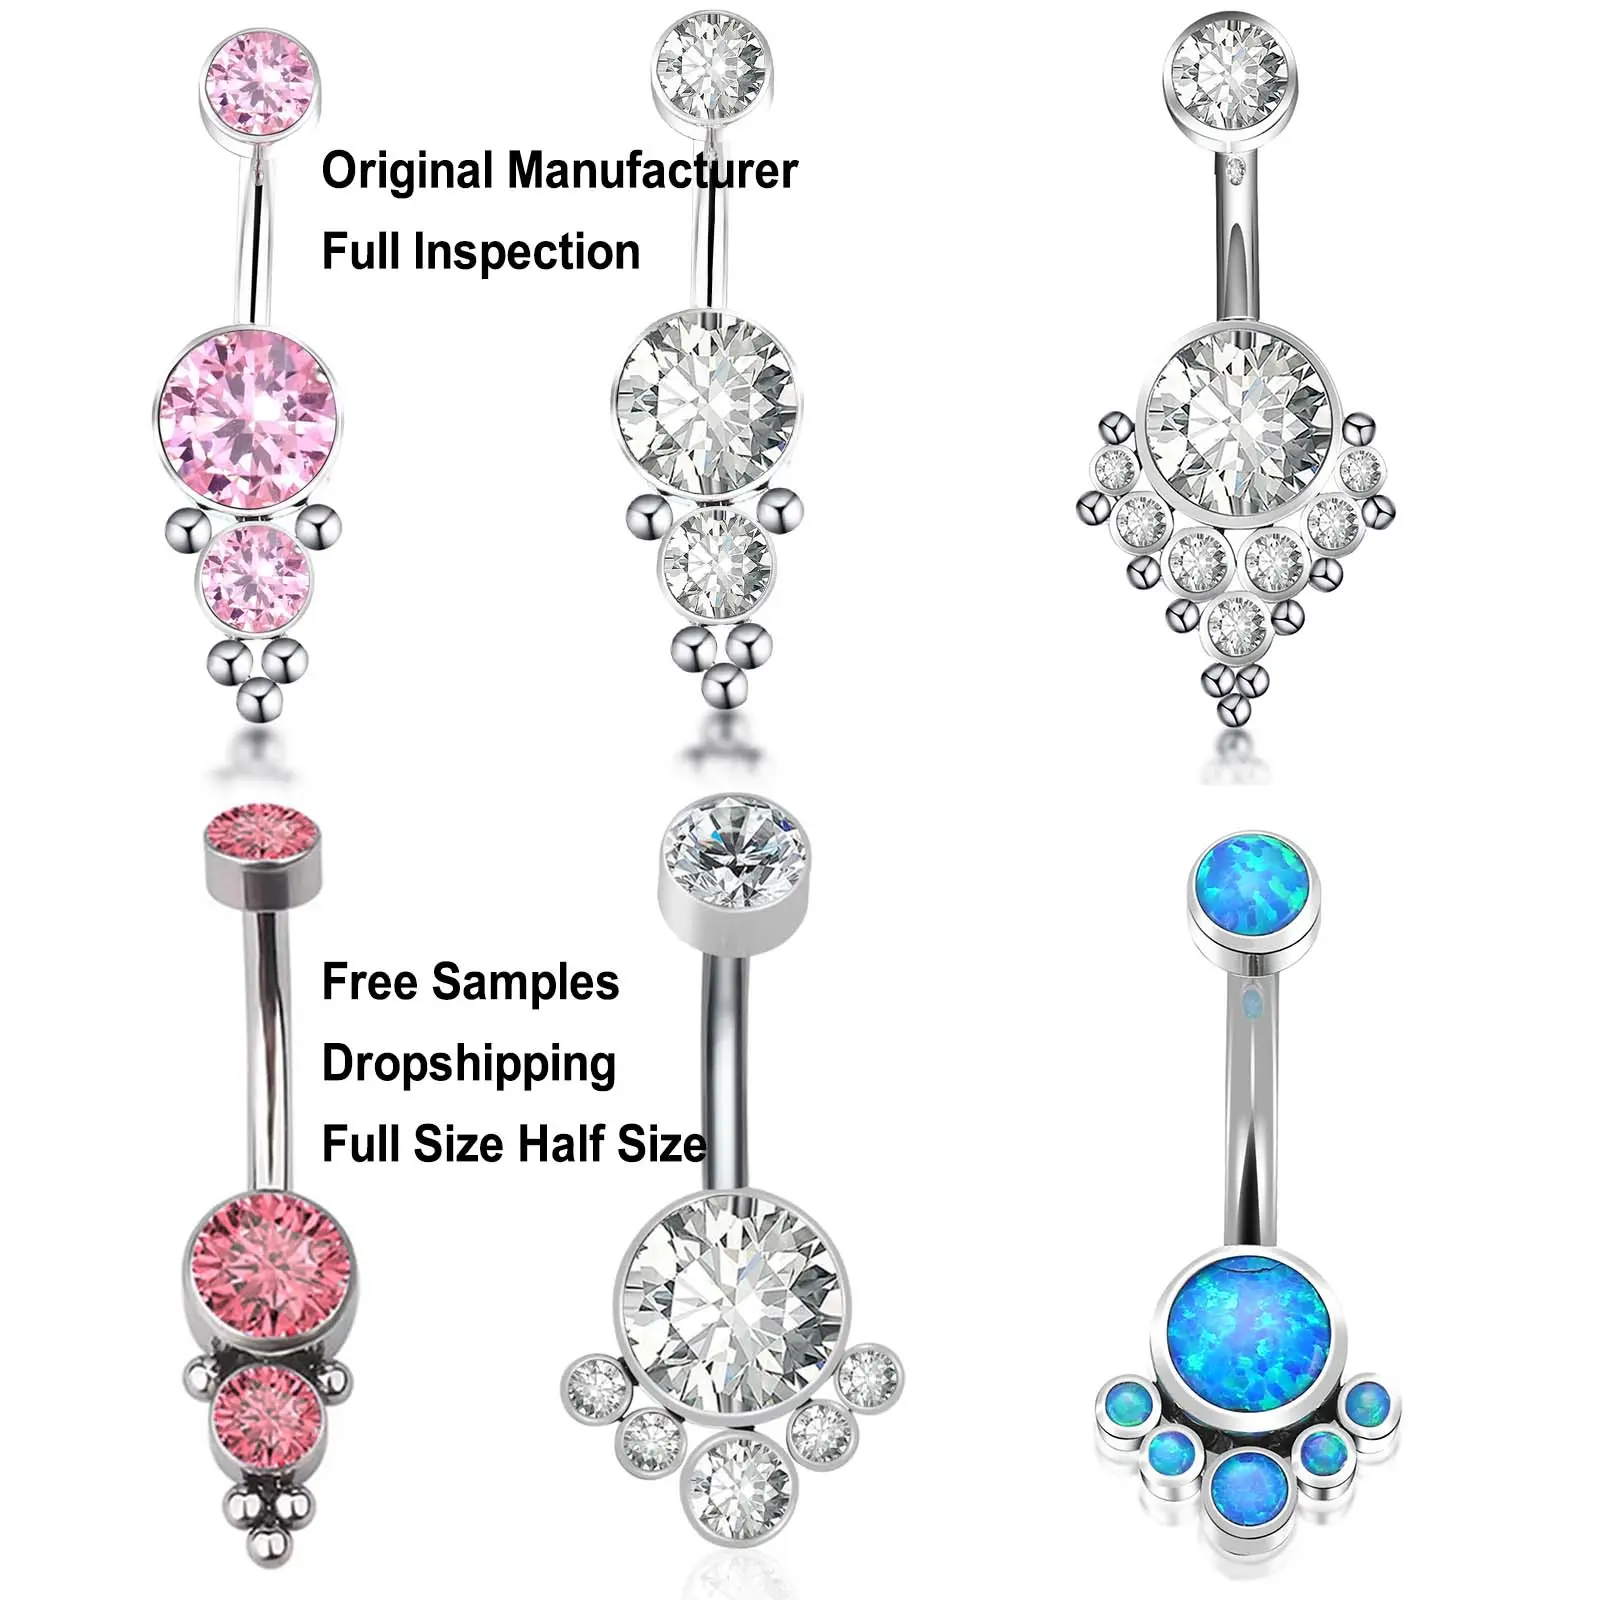 Wholesale Petite Navel Cubic Zirconia Opal Belly Button Rings White Pink Titanium Belly Bars for Women Body Piercing Jewelry